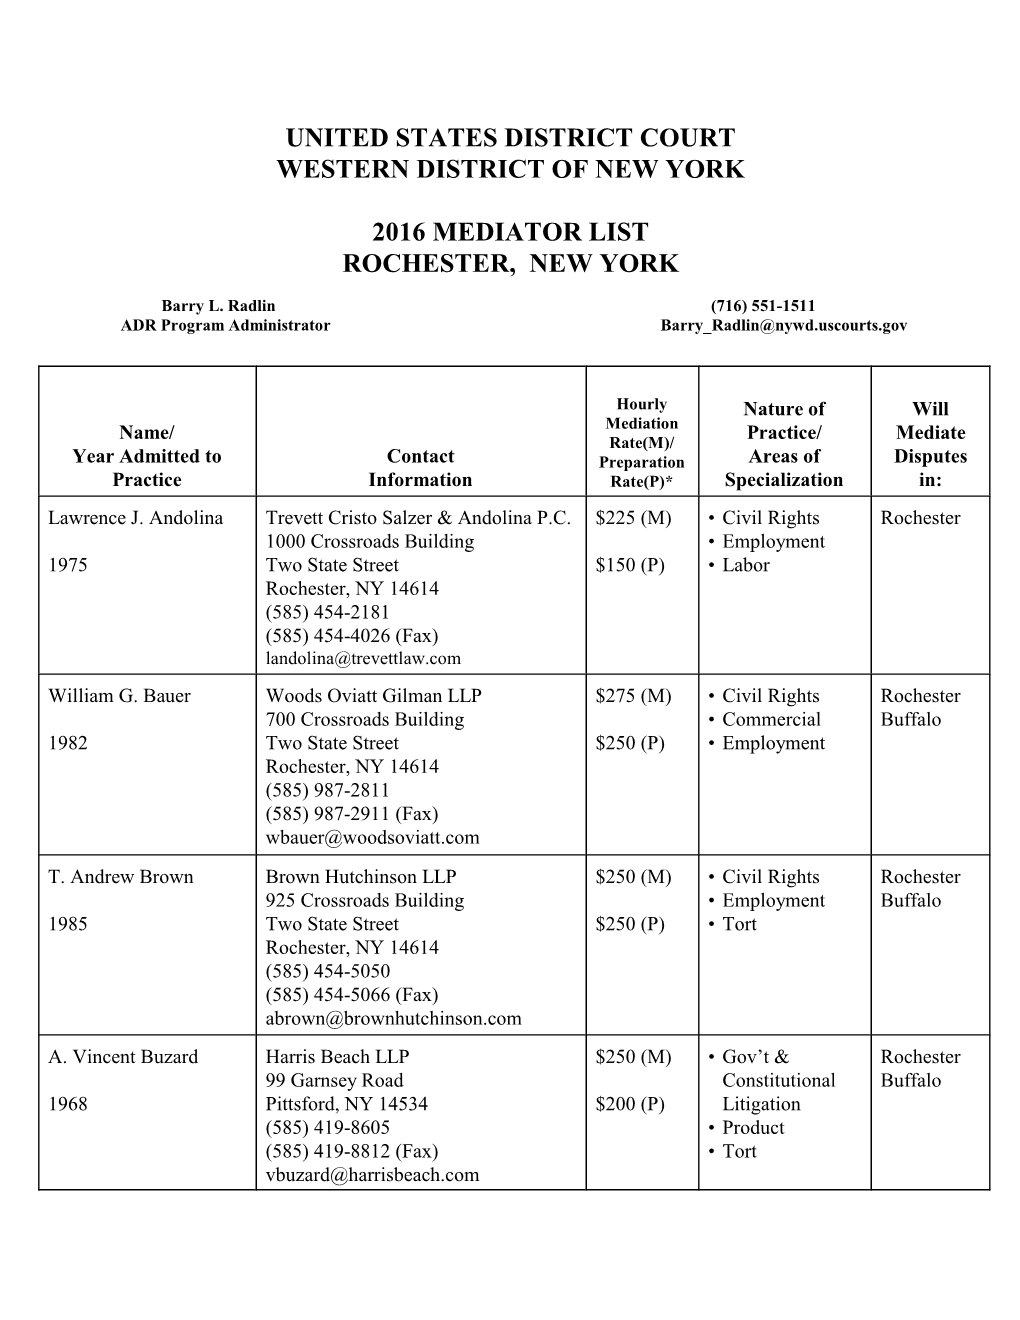 United States District Court Western District of New York 2016 Mediator